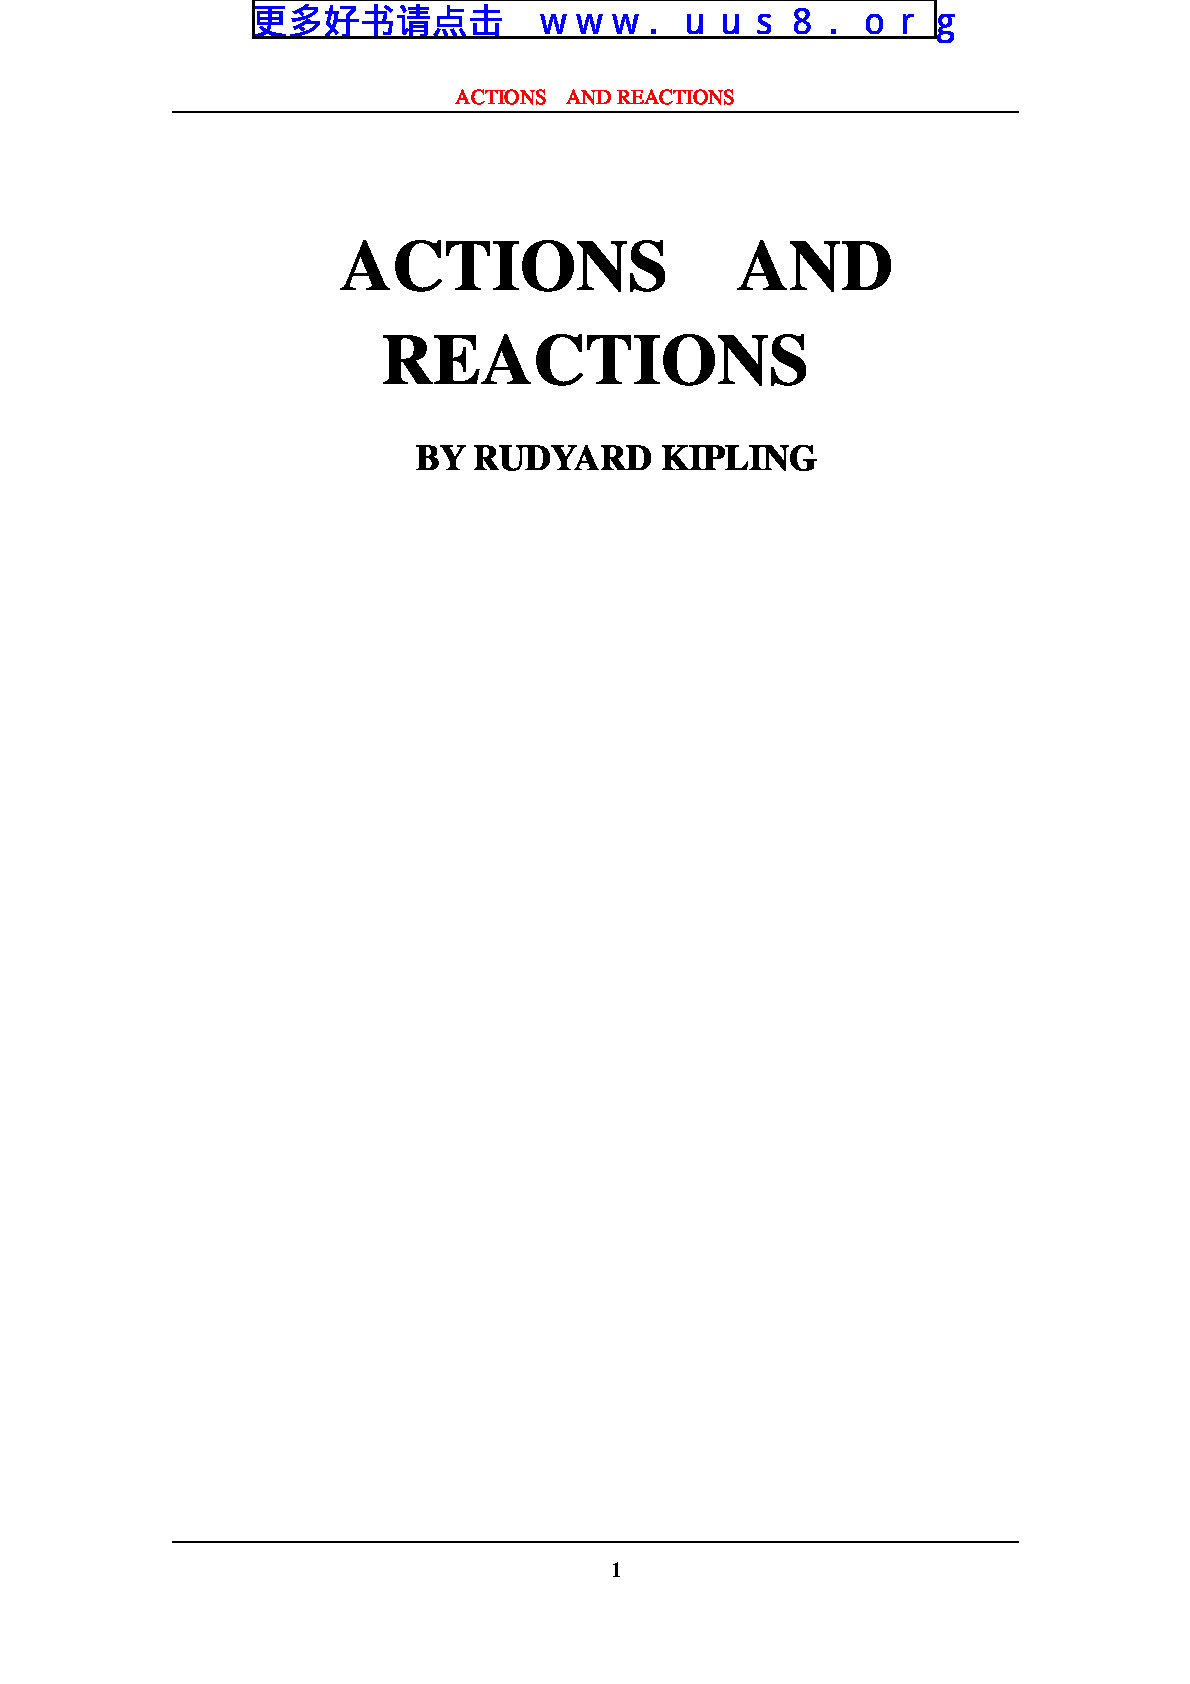 actions__and_reactions(作用与反作用)